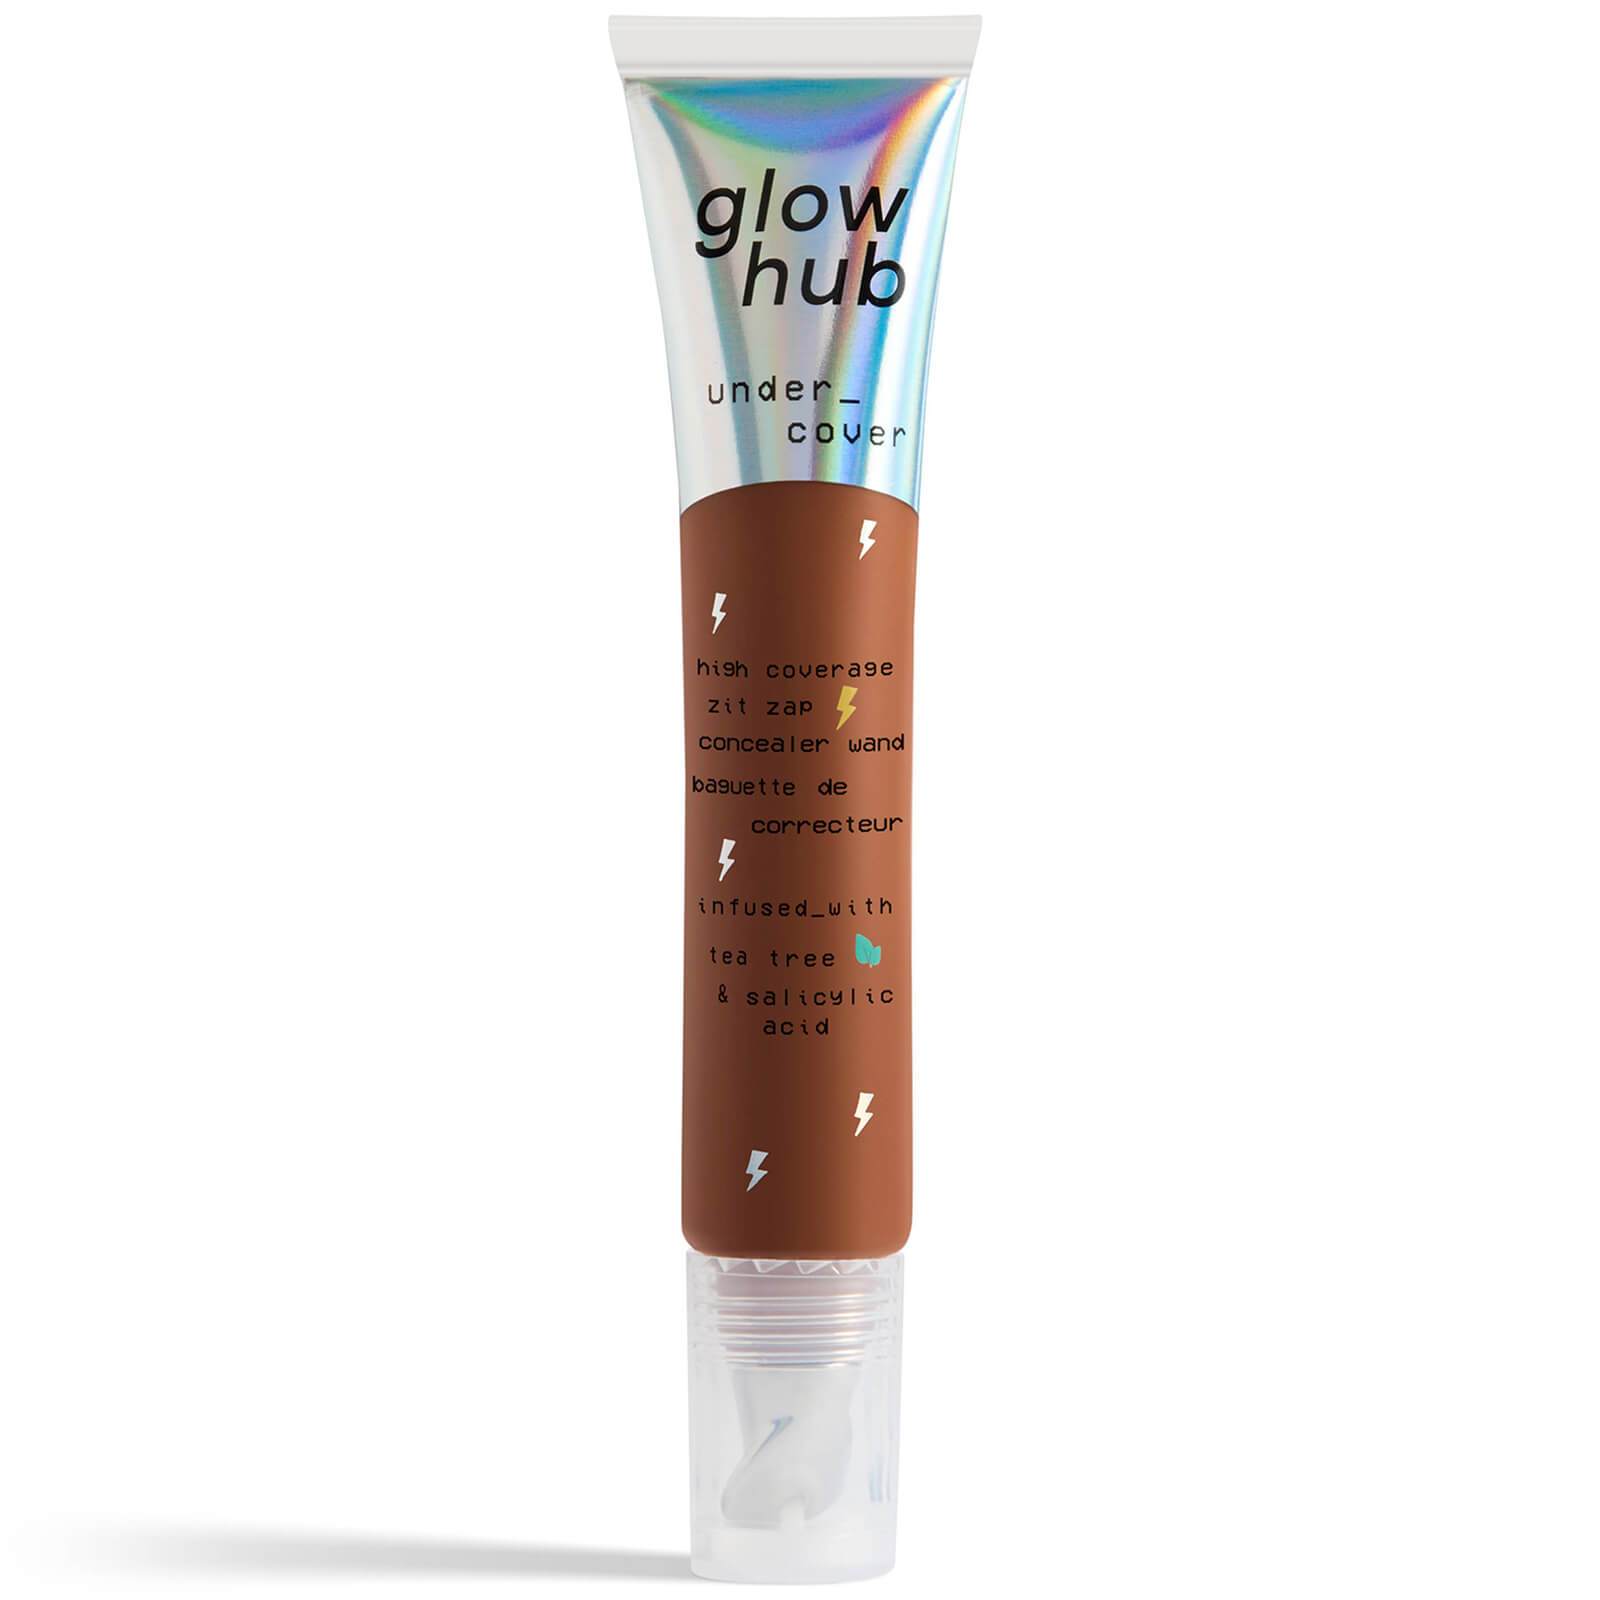 Glow Hub Under Cover High Coverage Zit Zap Concealer Wand 15ml (various Shades) - 23w In Brown